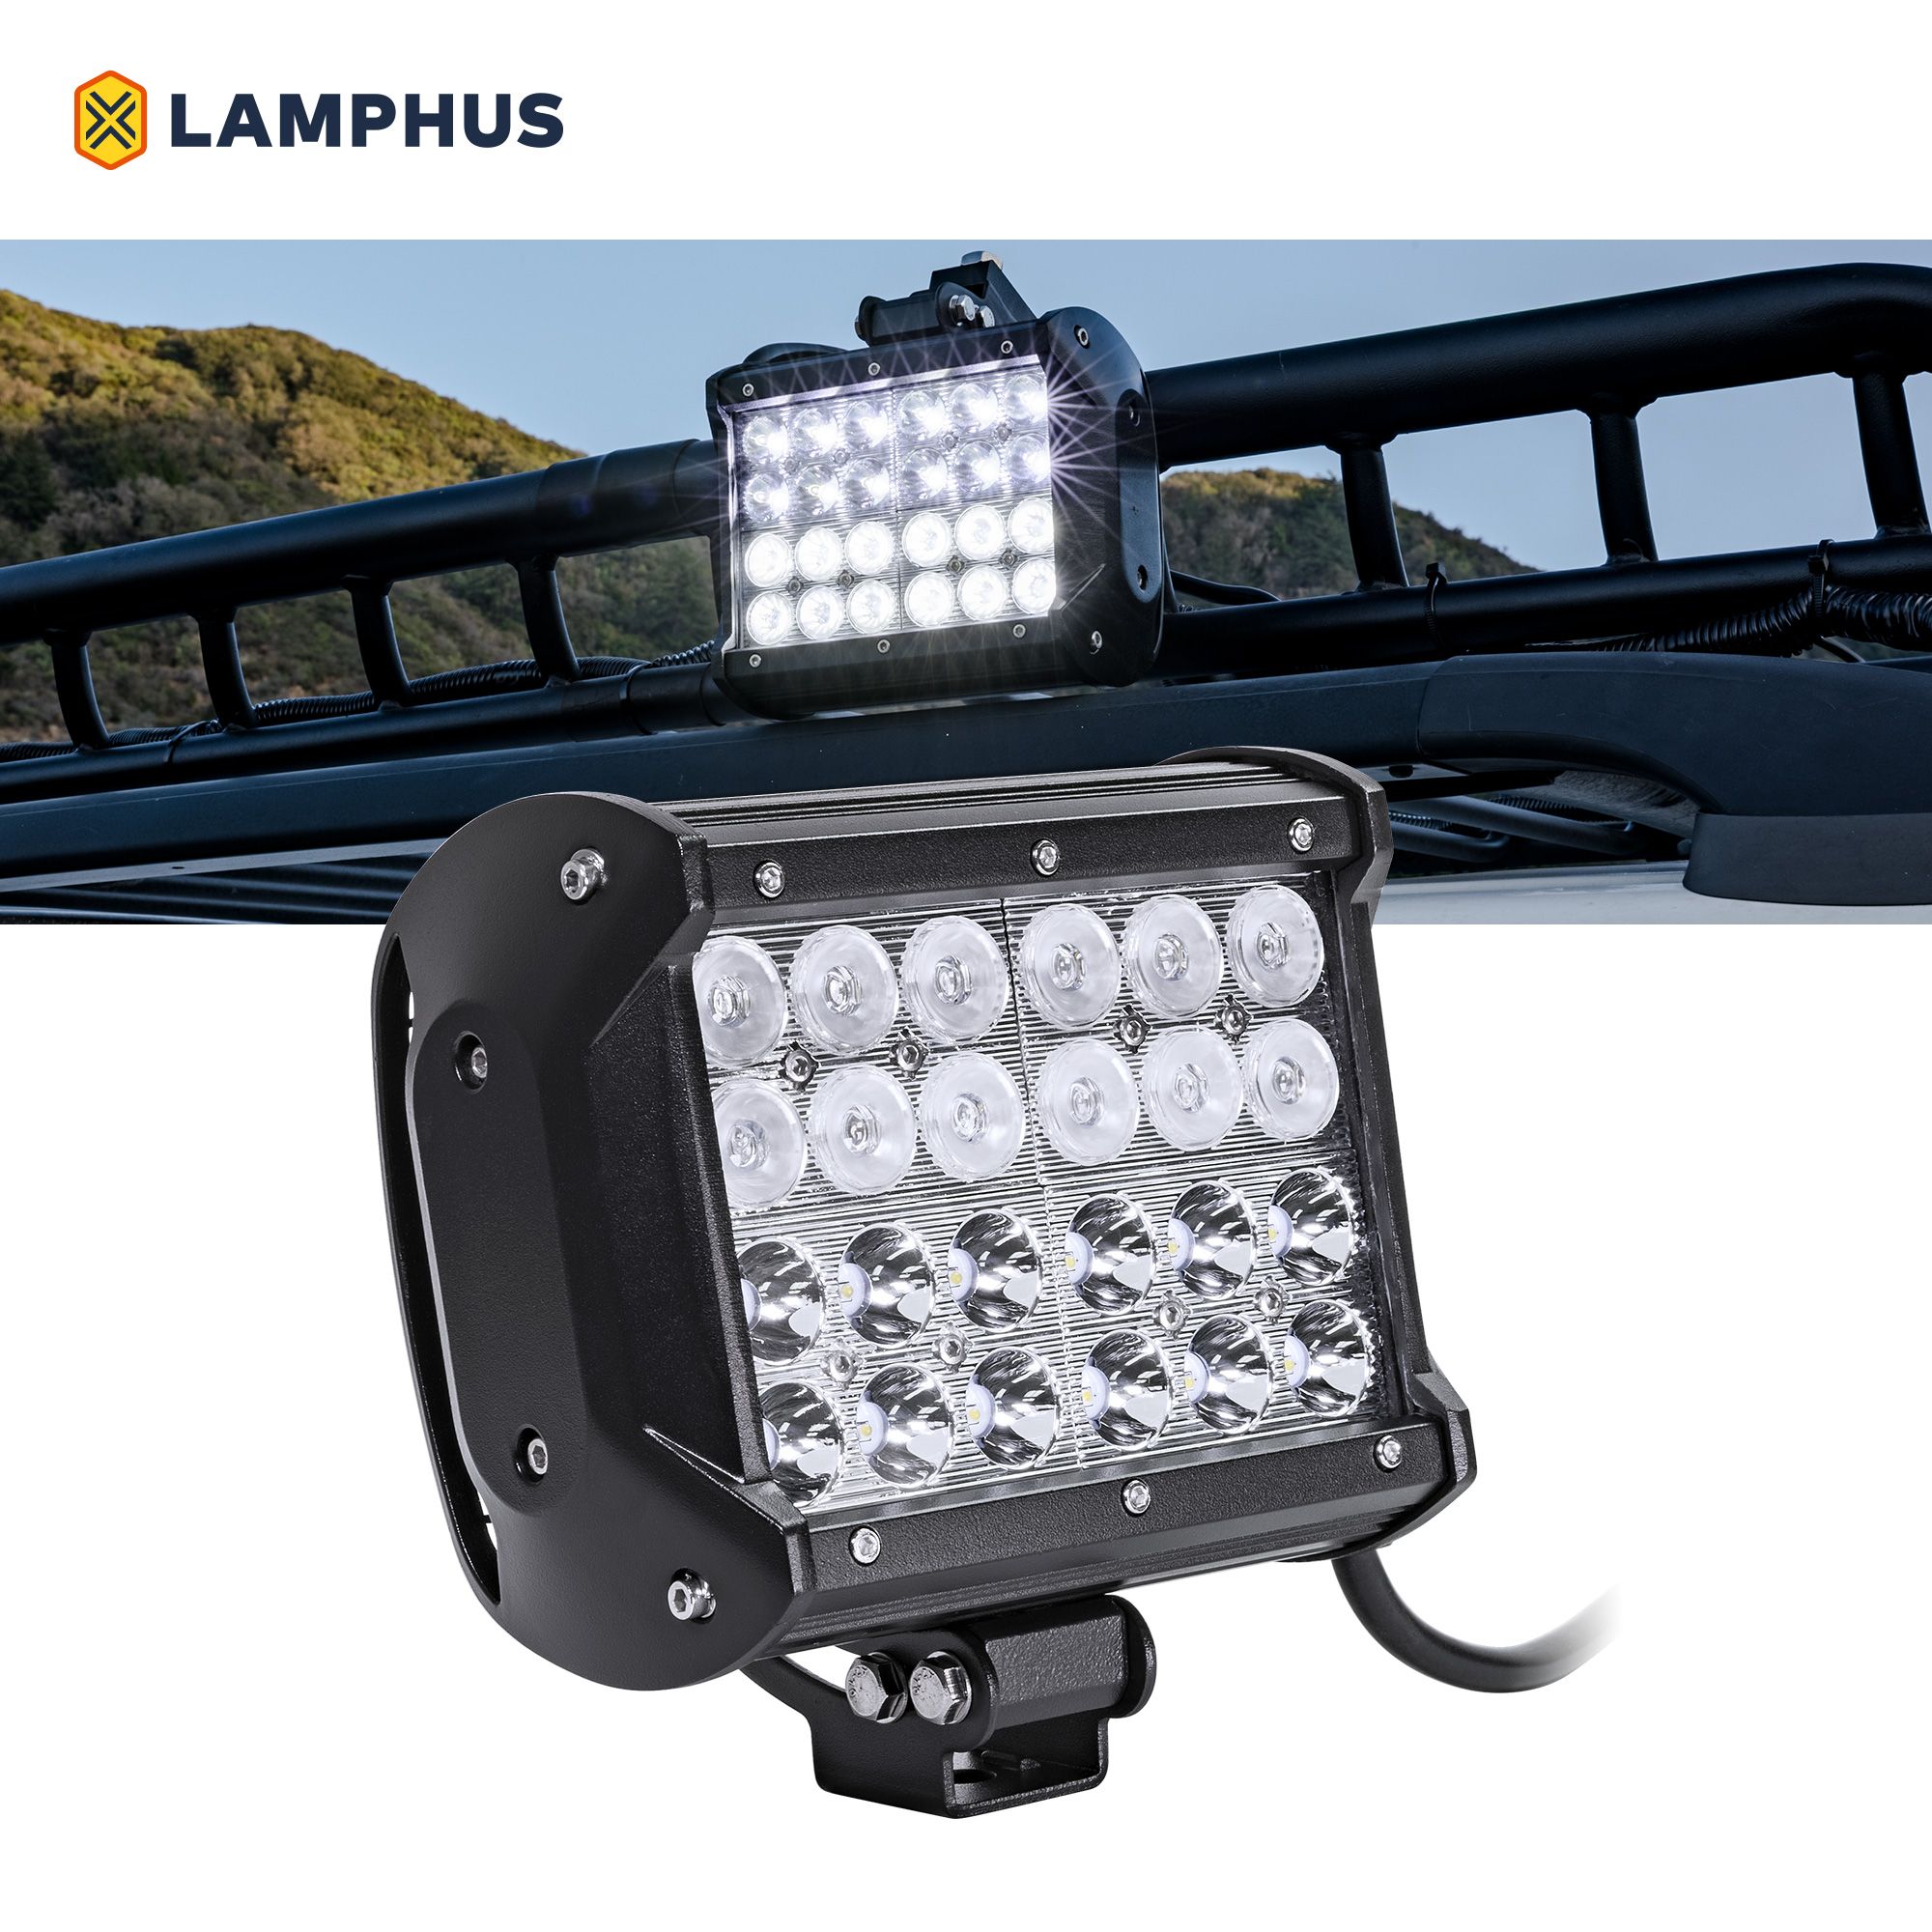 CRUIZER Dual-Stacked 6.5-Inch 72W LED Light Bar